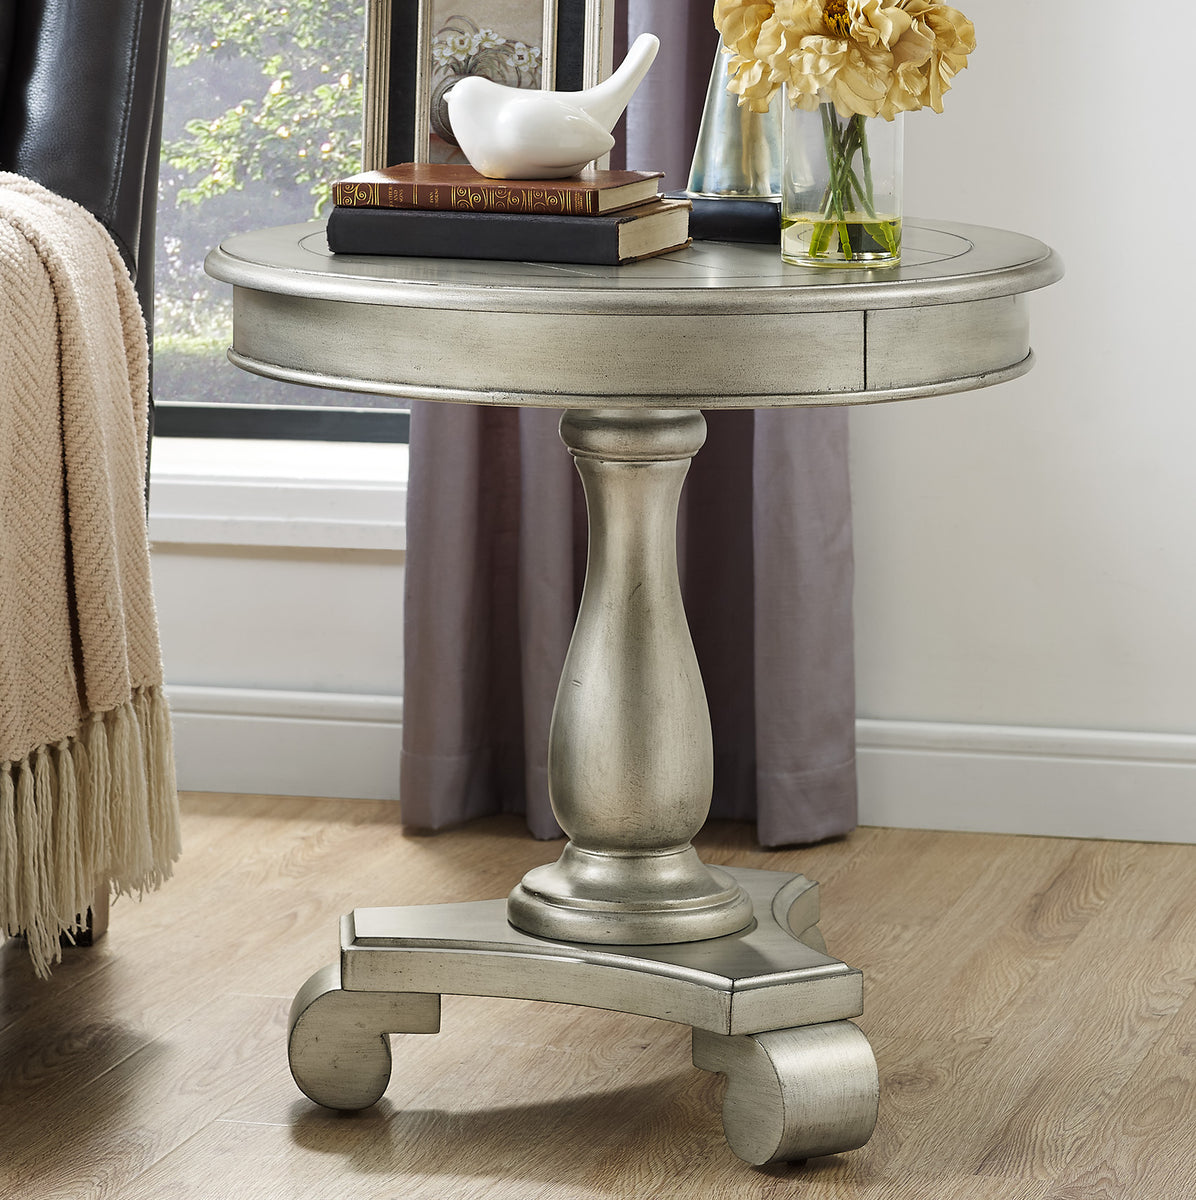 Rene Round Wood Pedestal Side Table, Champagne – Roundhill Furniture